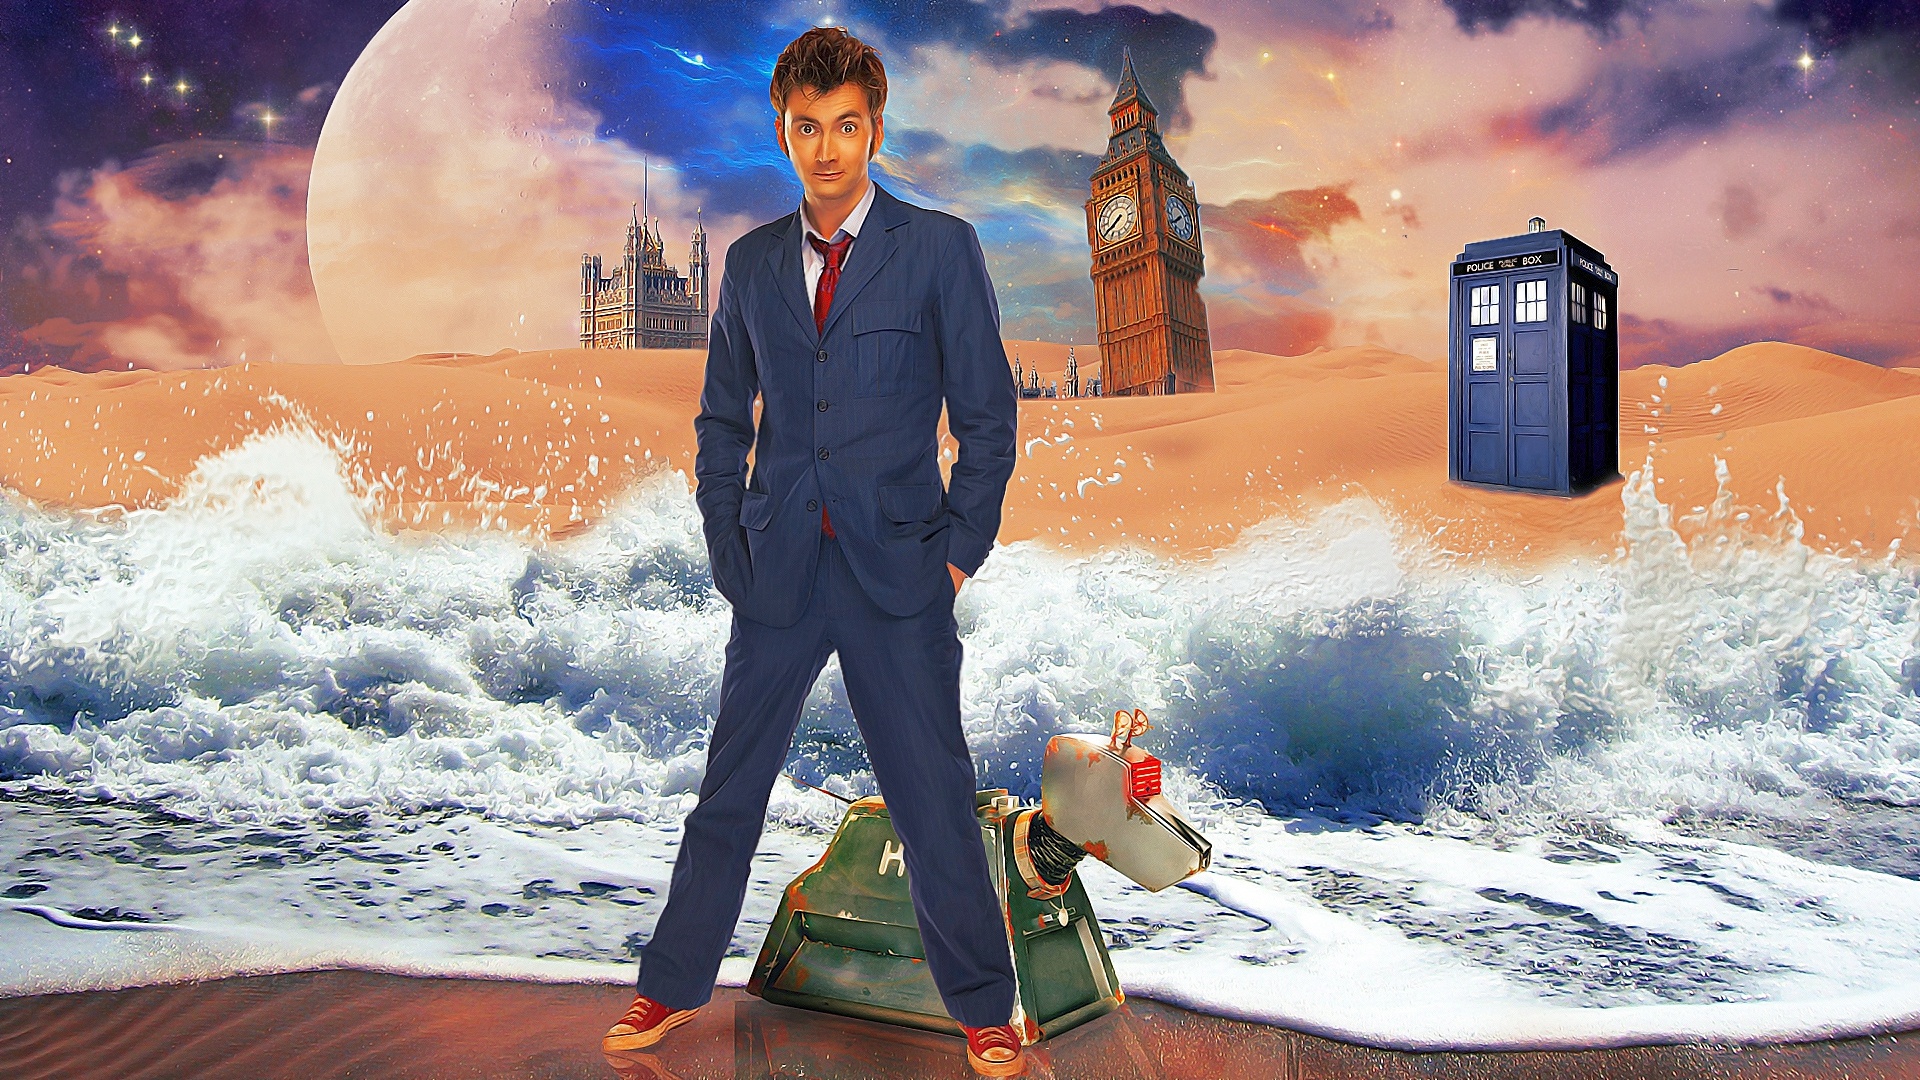 David Tennant, Doctor Who, Wallpapers, Backgrounds, 1920x1080 Full HD Desktop